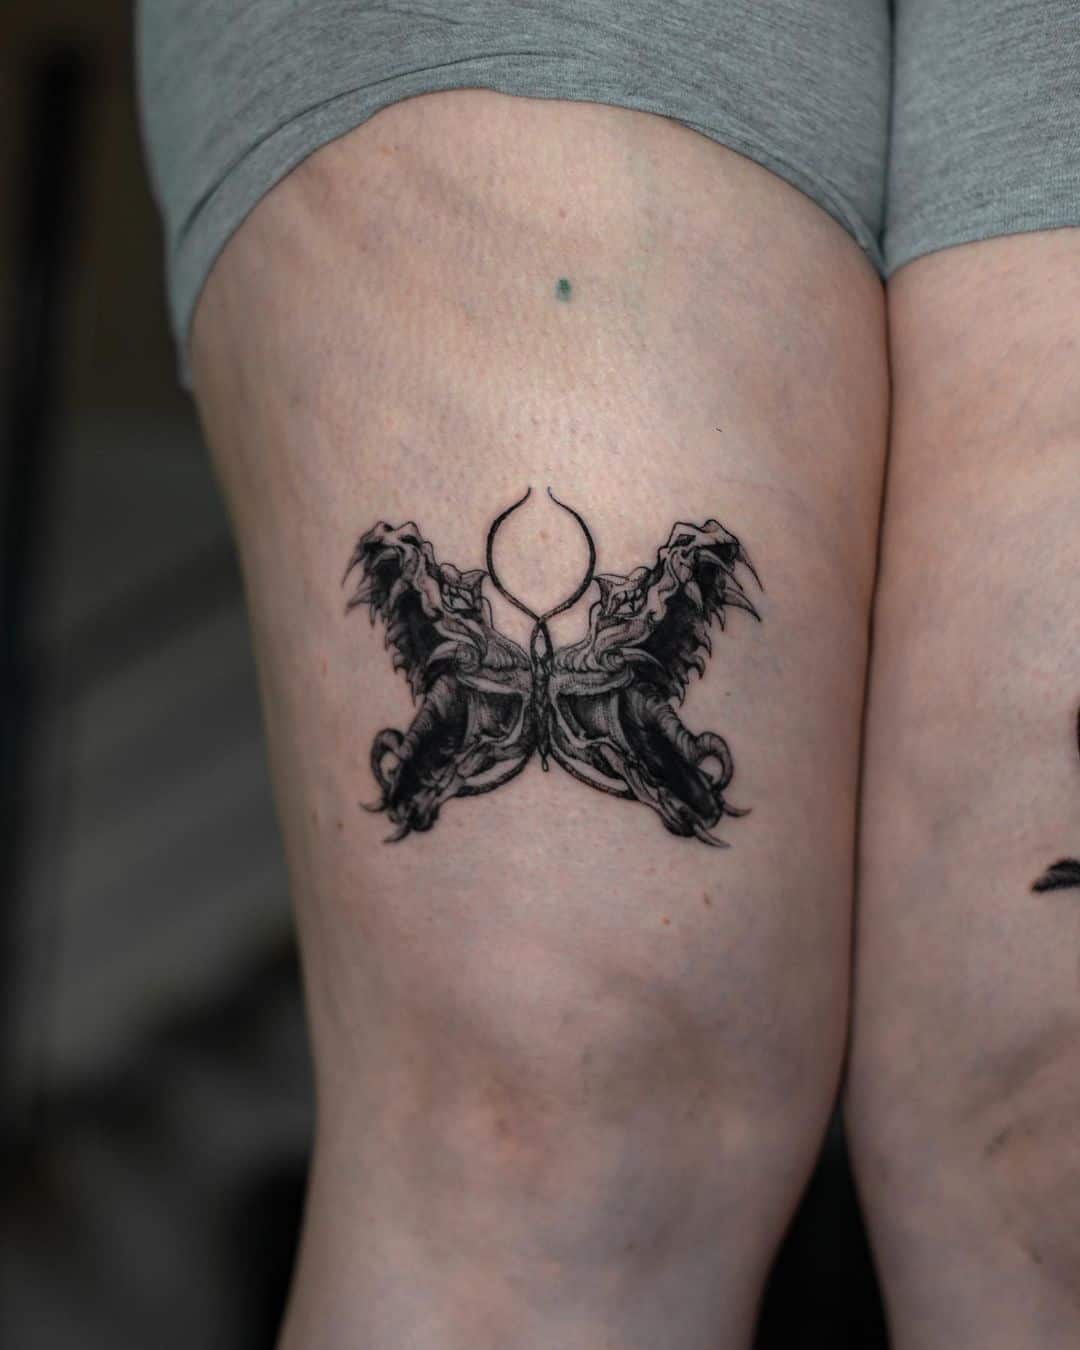 Butterfly tattoo on thigh by homearmy